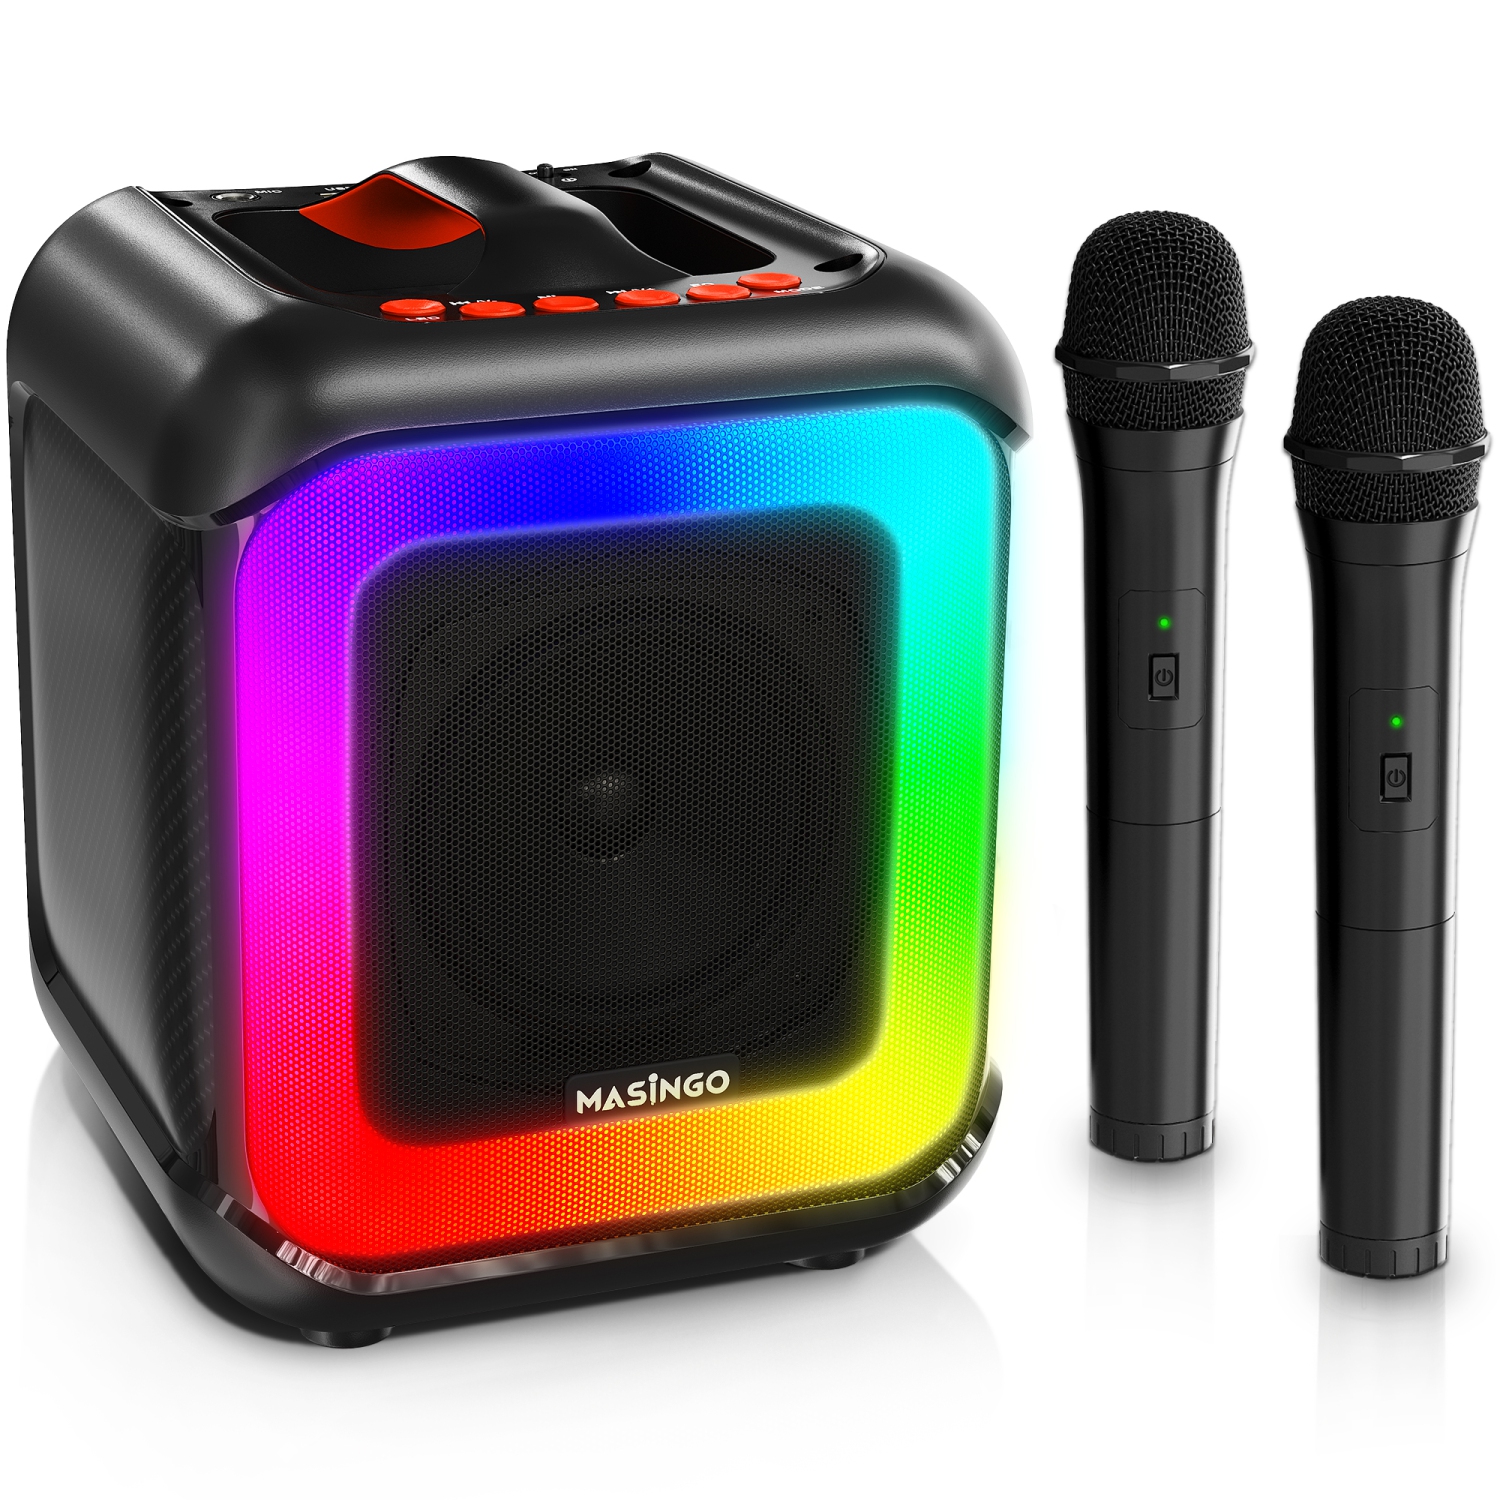 Karaoke Machine for Kids and Adults with 2 Wireless Microphones, PA Portable Speaker Toy for Girls and Boys with Colorful LED Lights, Supports TF Card/USB, TWS for Home Party, C7